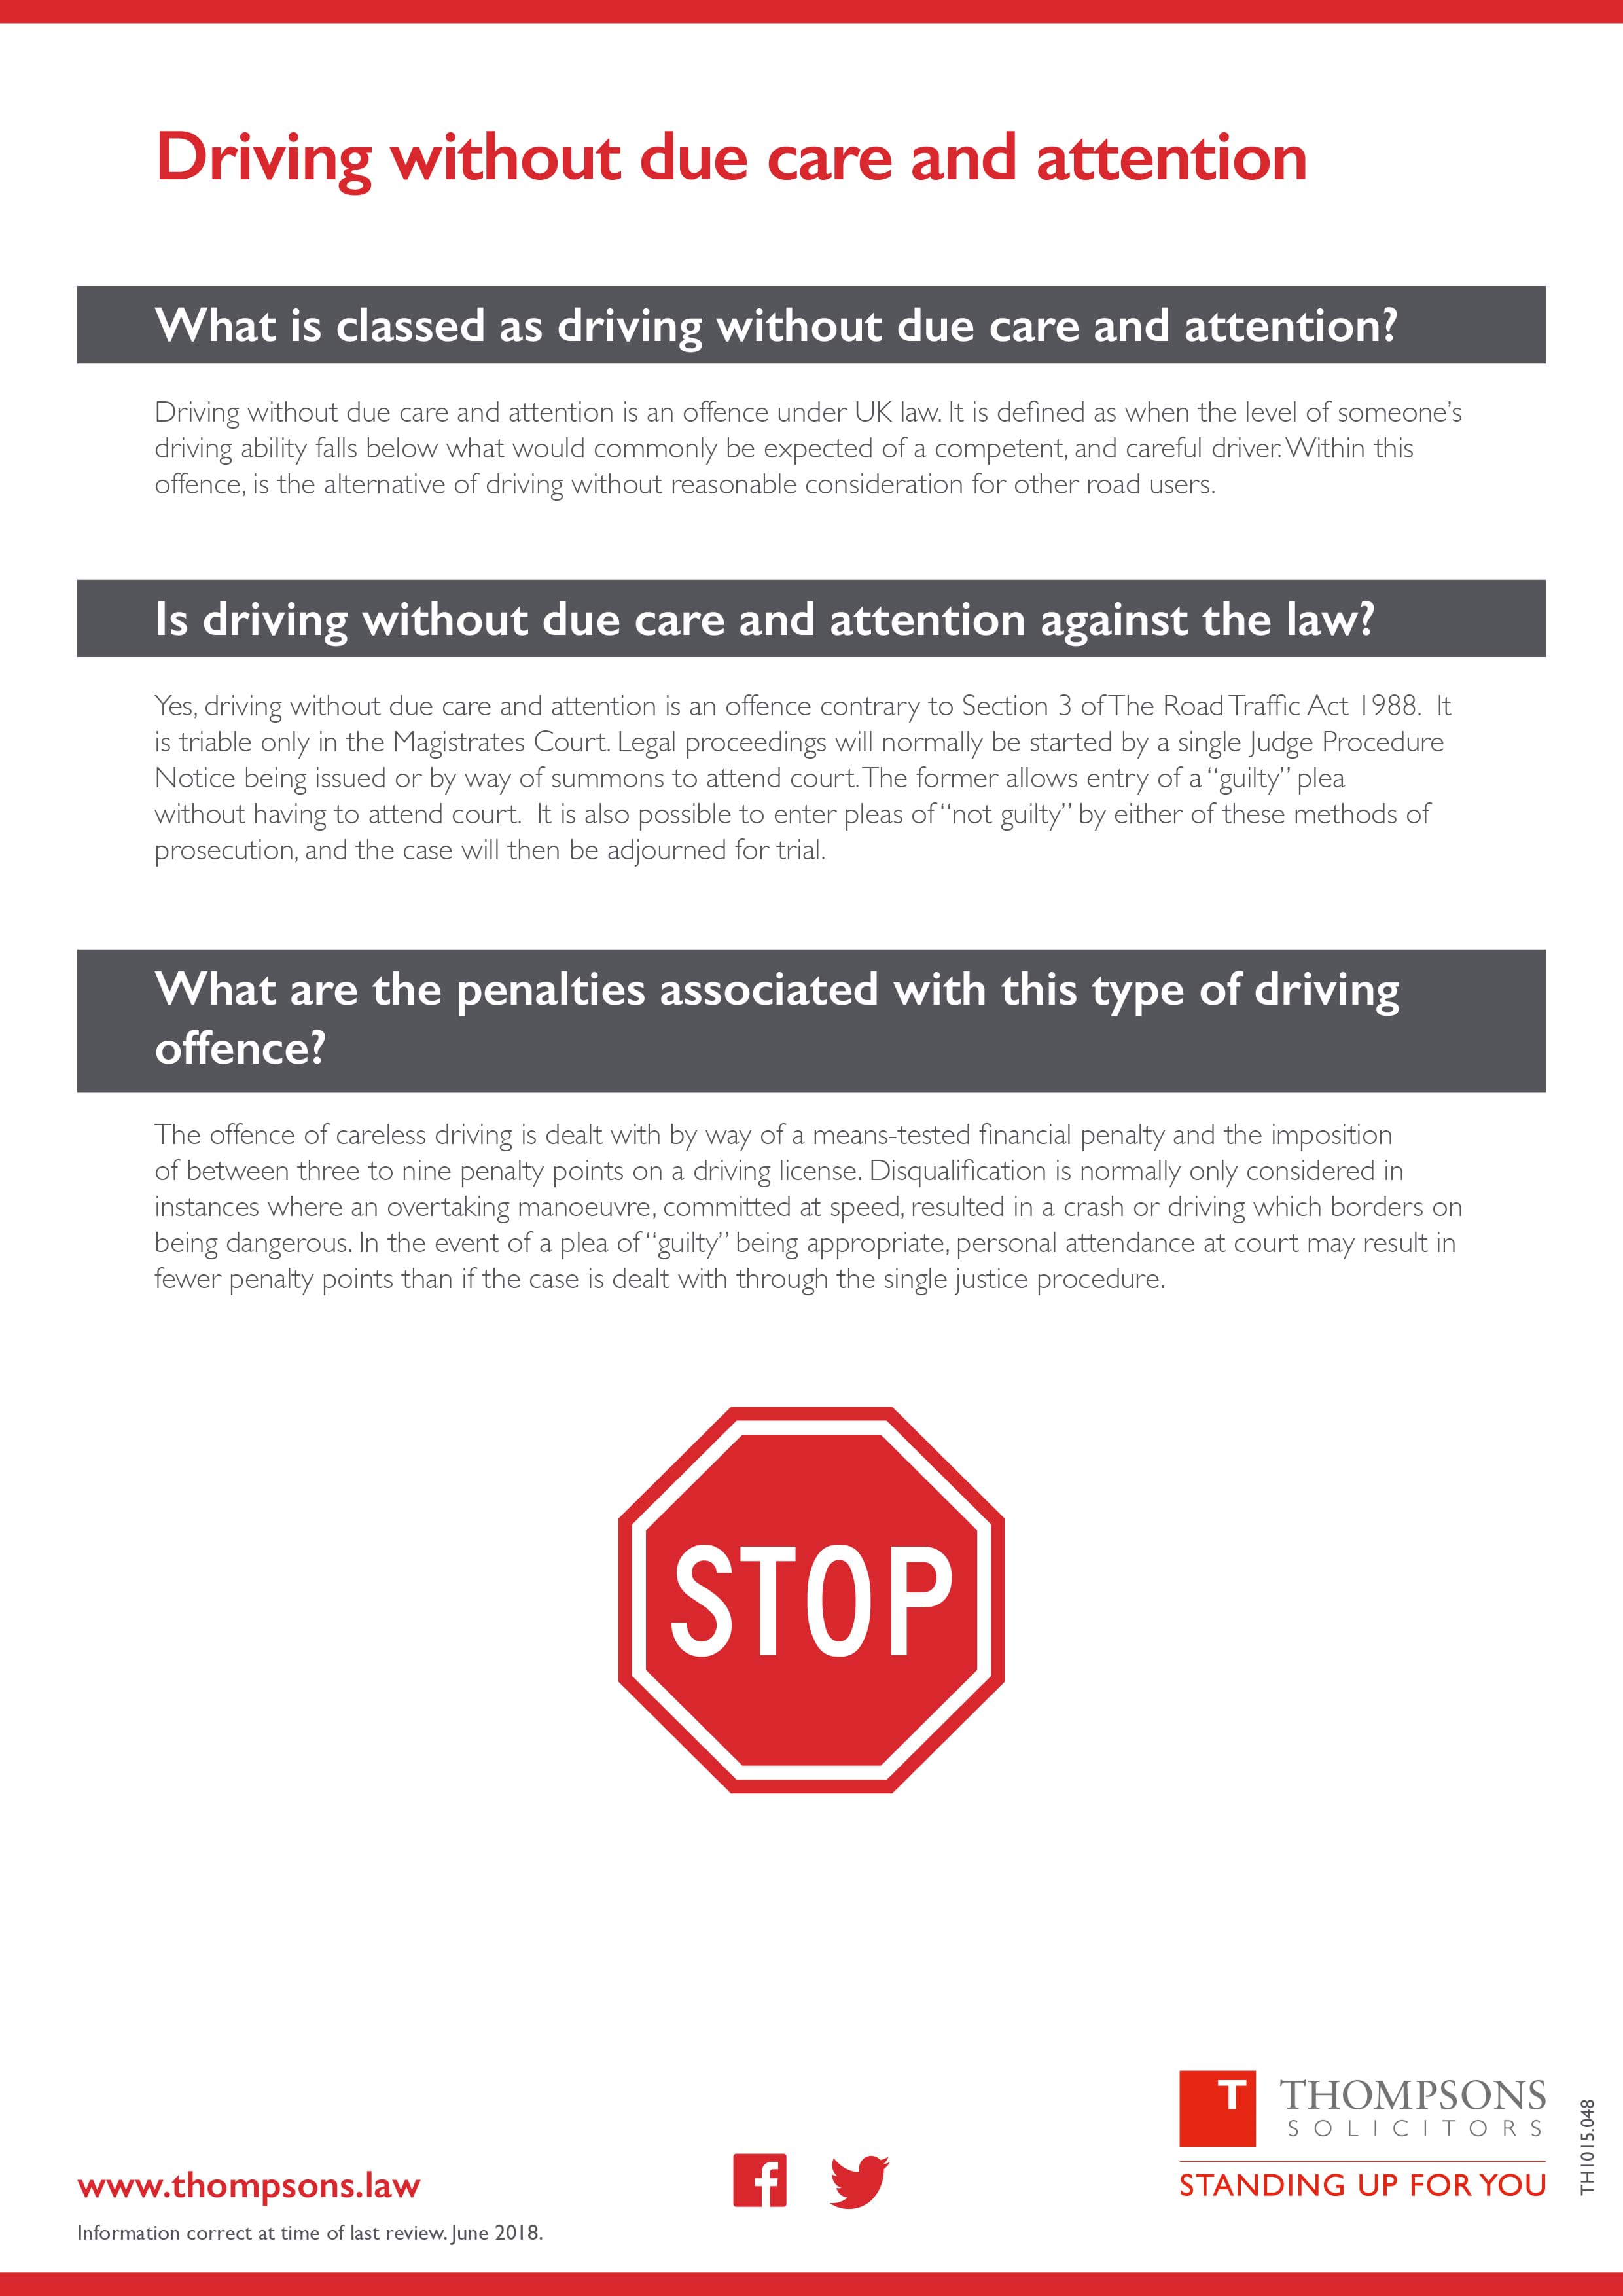 Driving without due care and attention factsheet